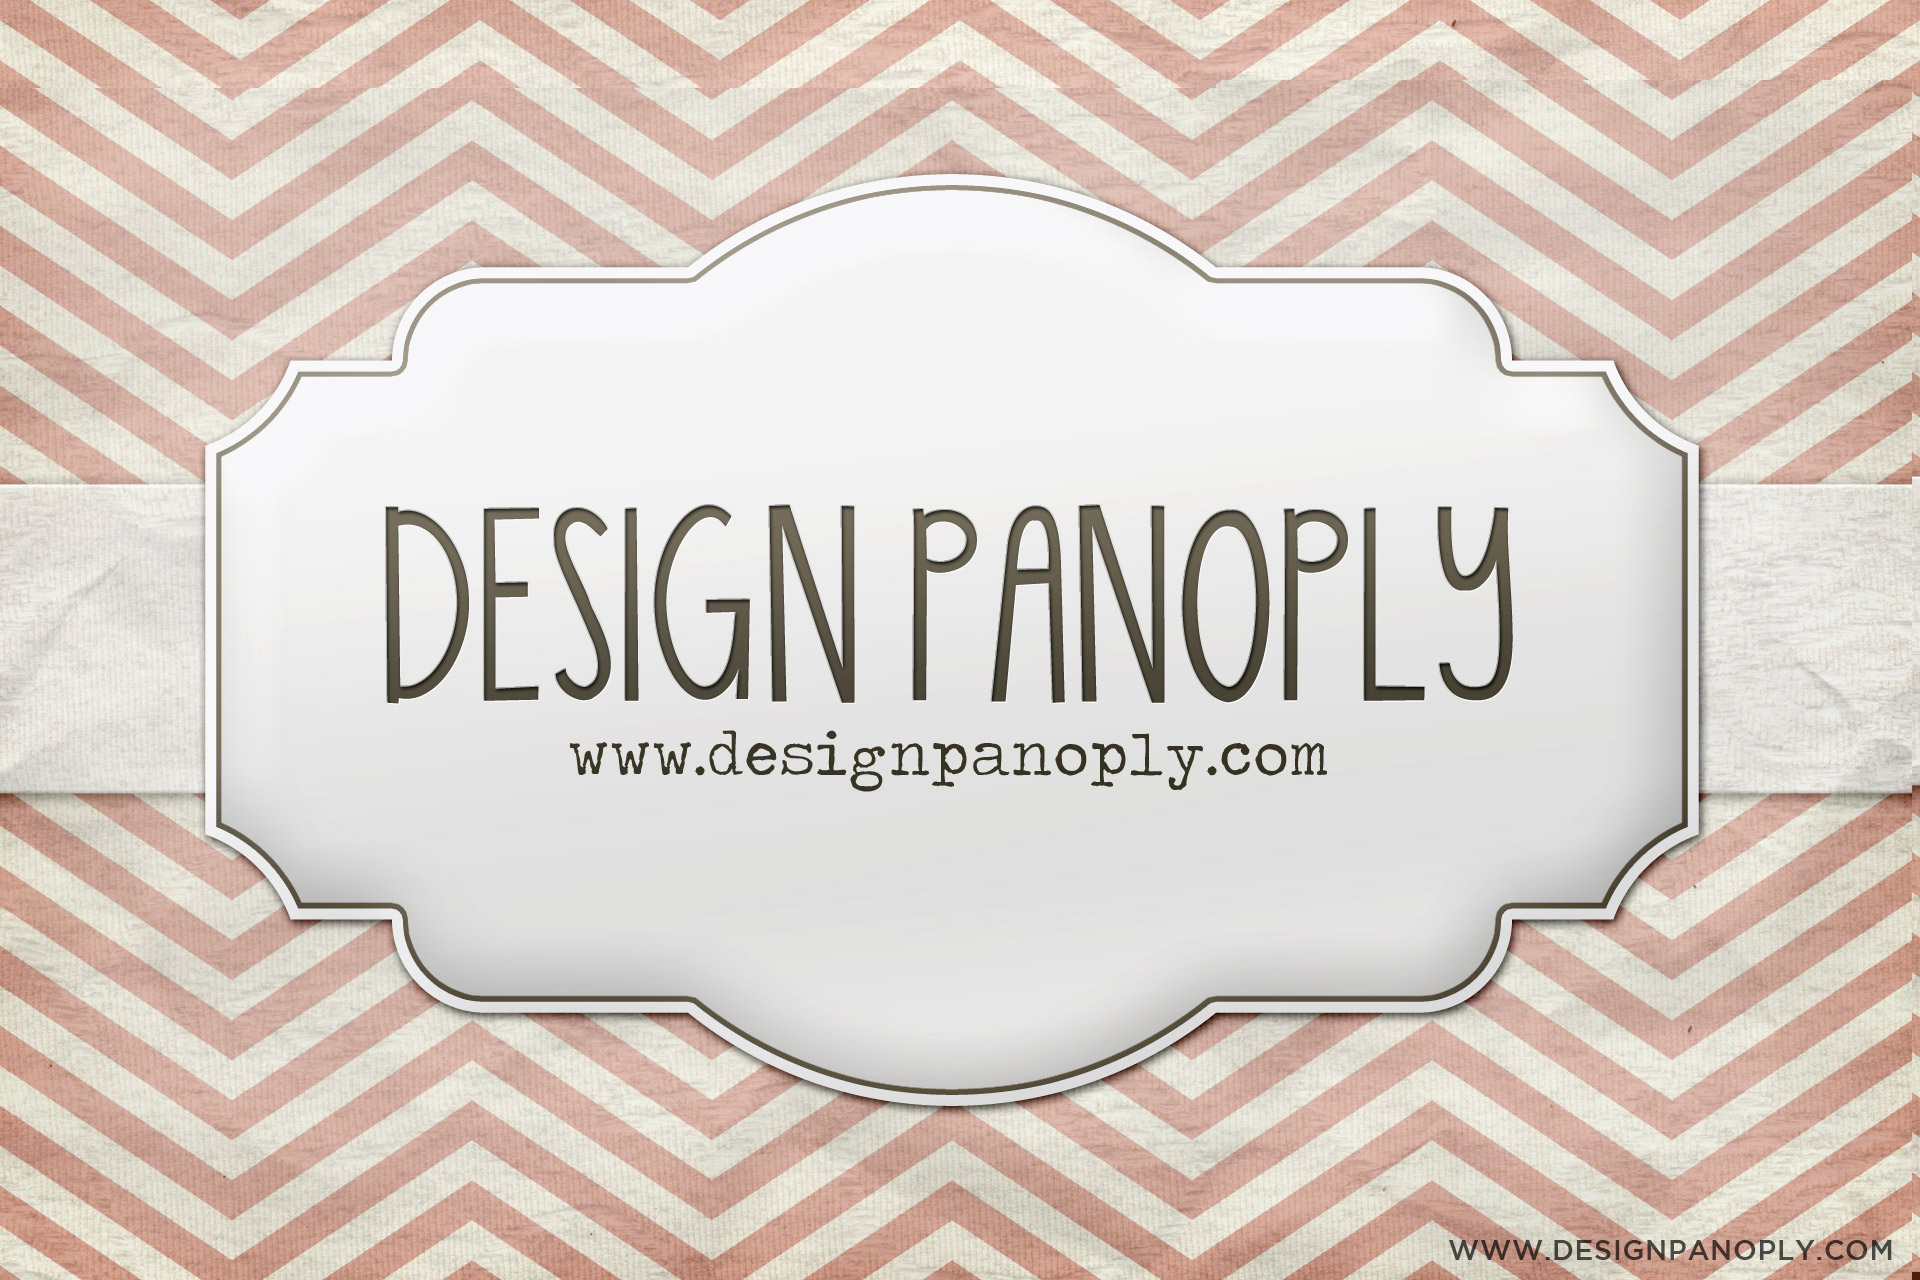 Realistic Patterned Vintage Card and Ribbon | Design Panoply